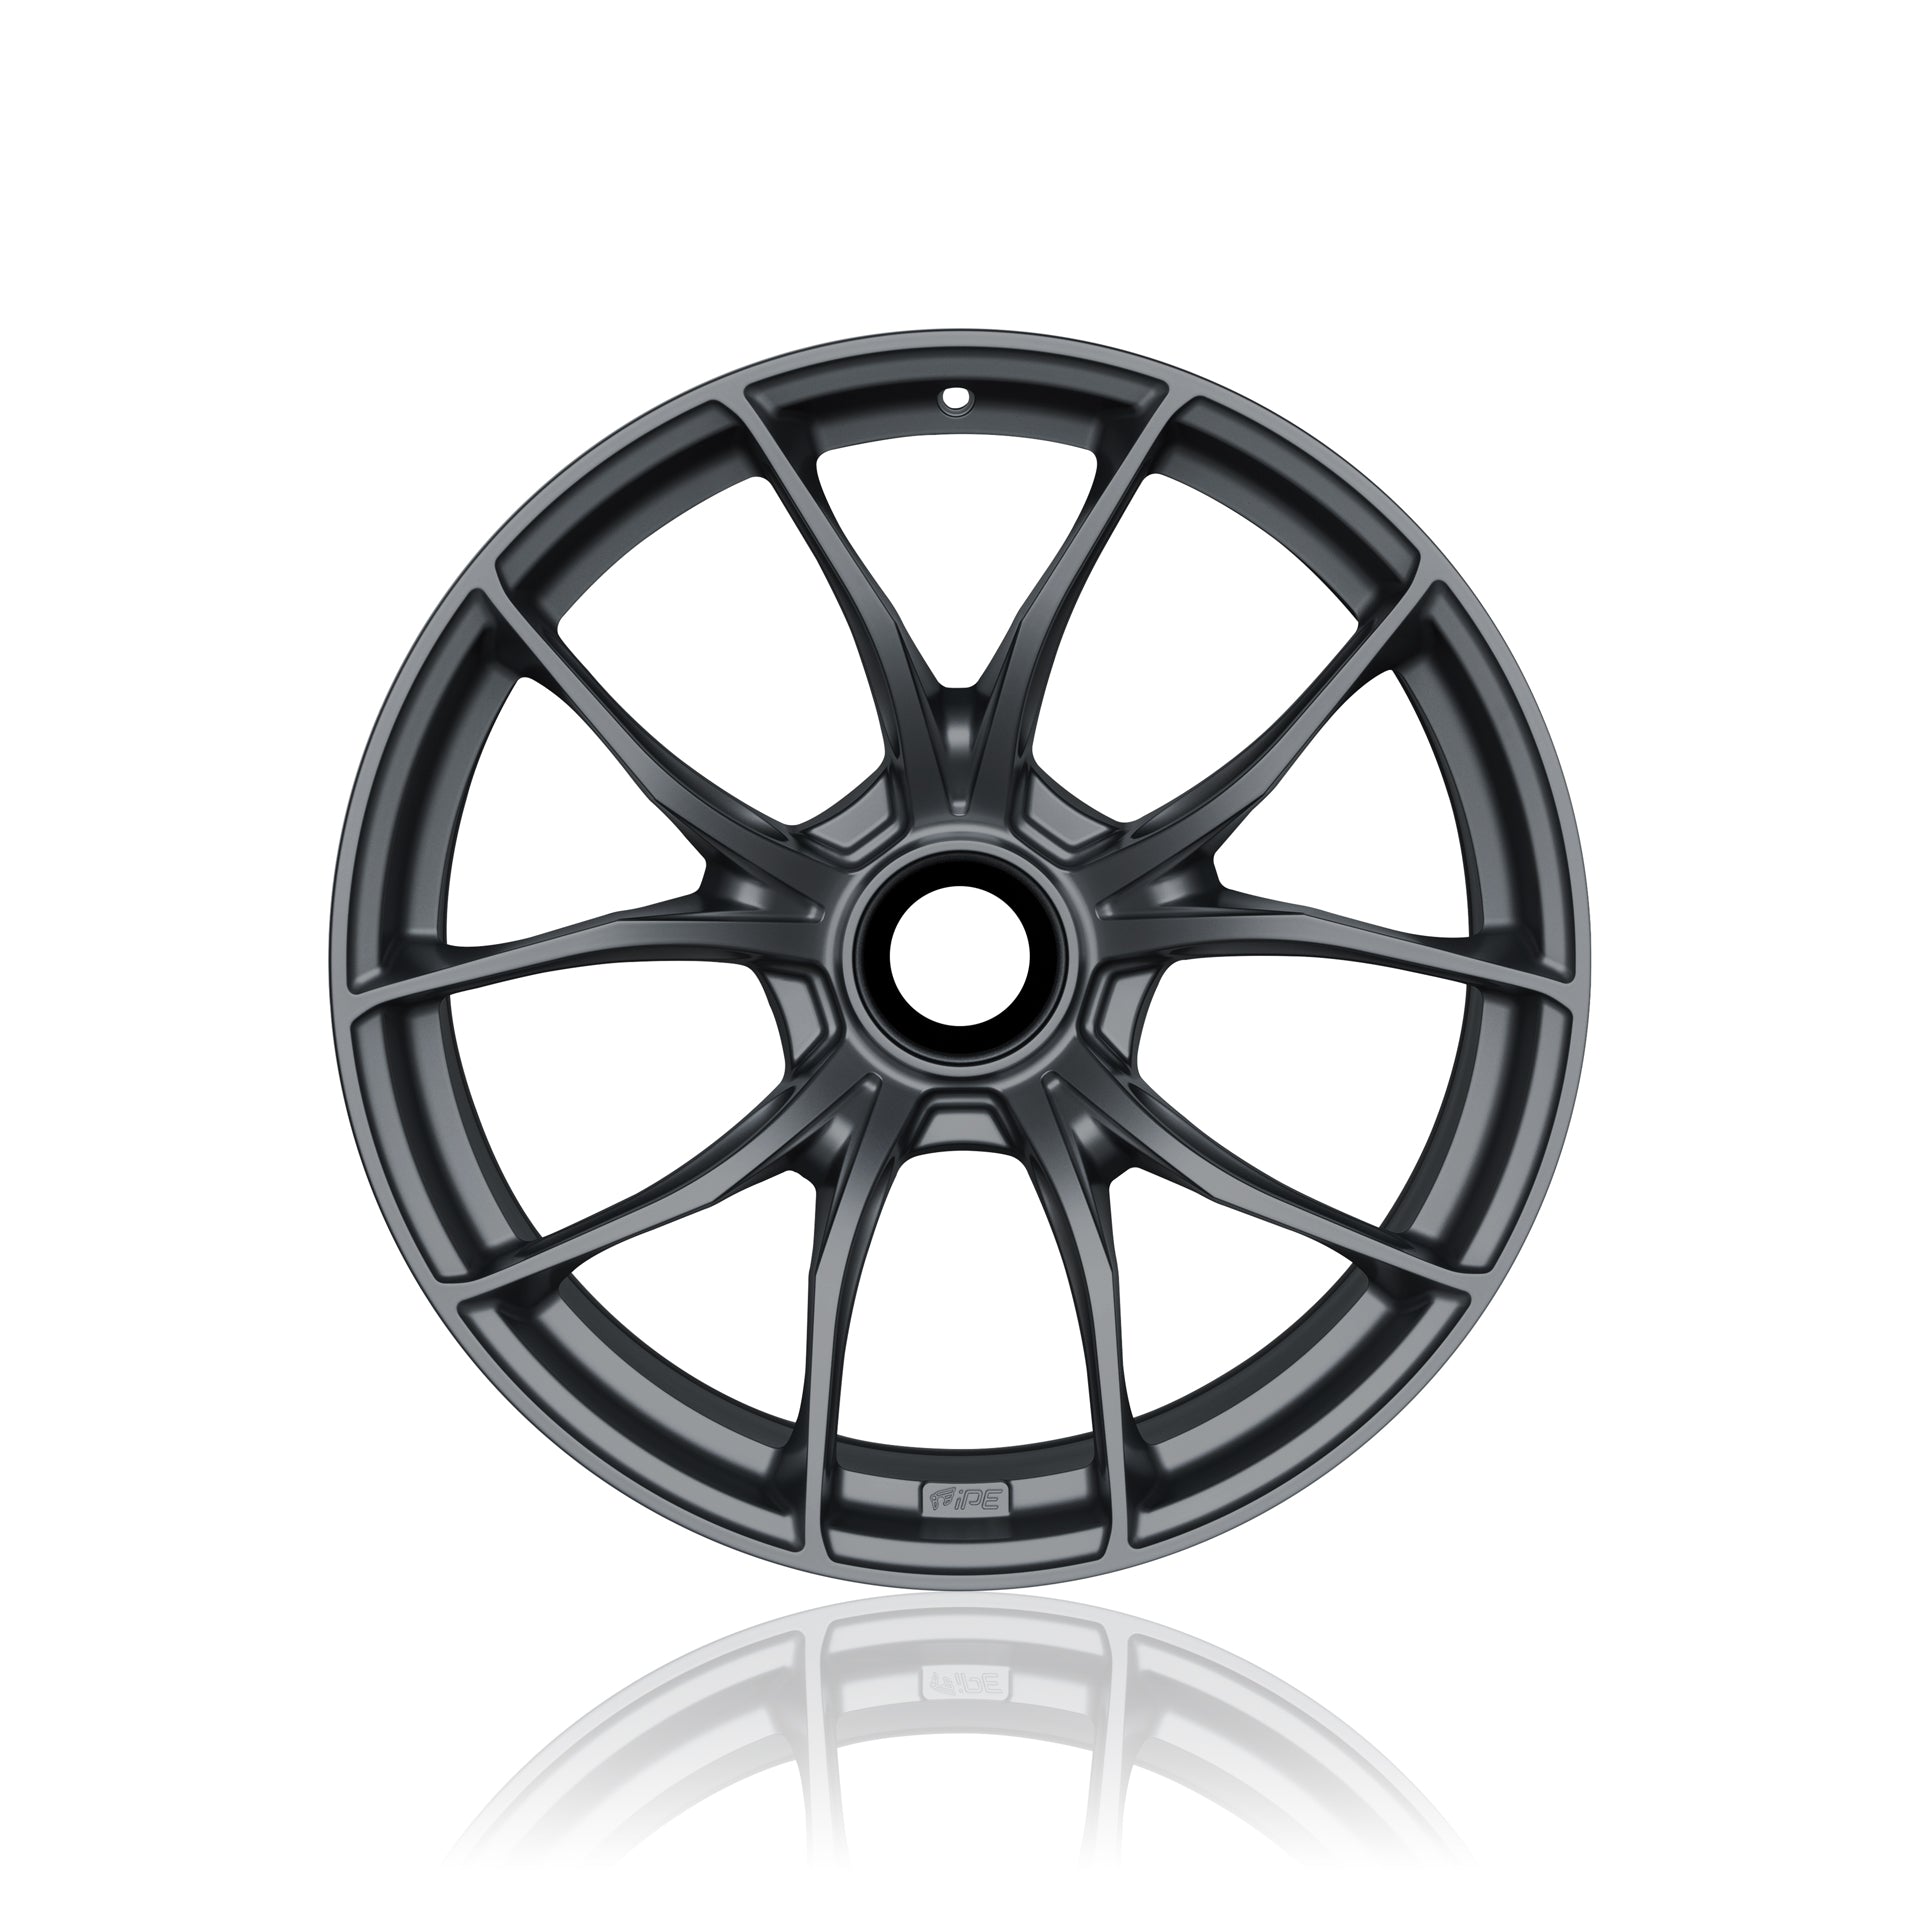 Front view of an anthracite IPE MFR-01 Magnesium wheel on a white background